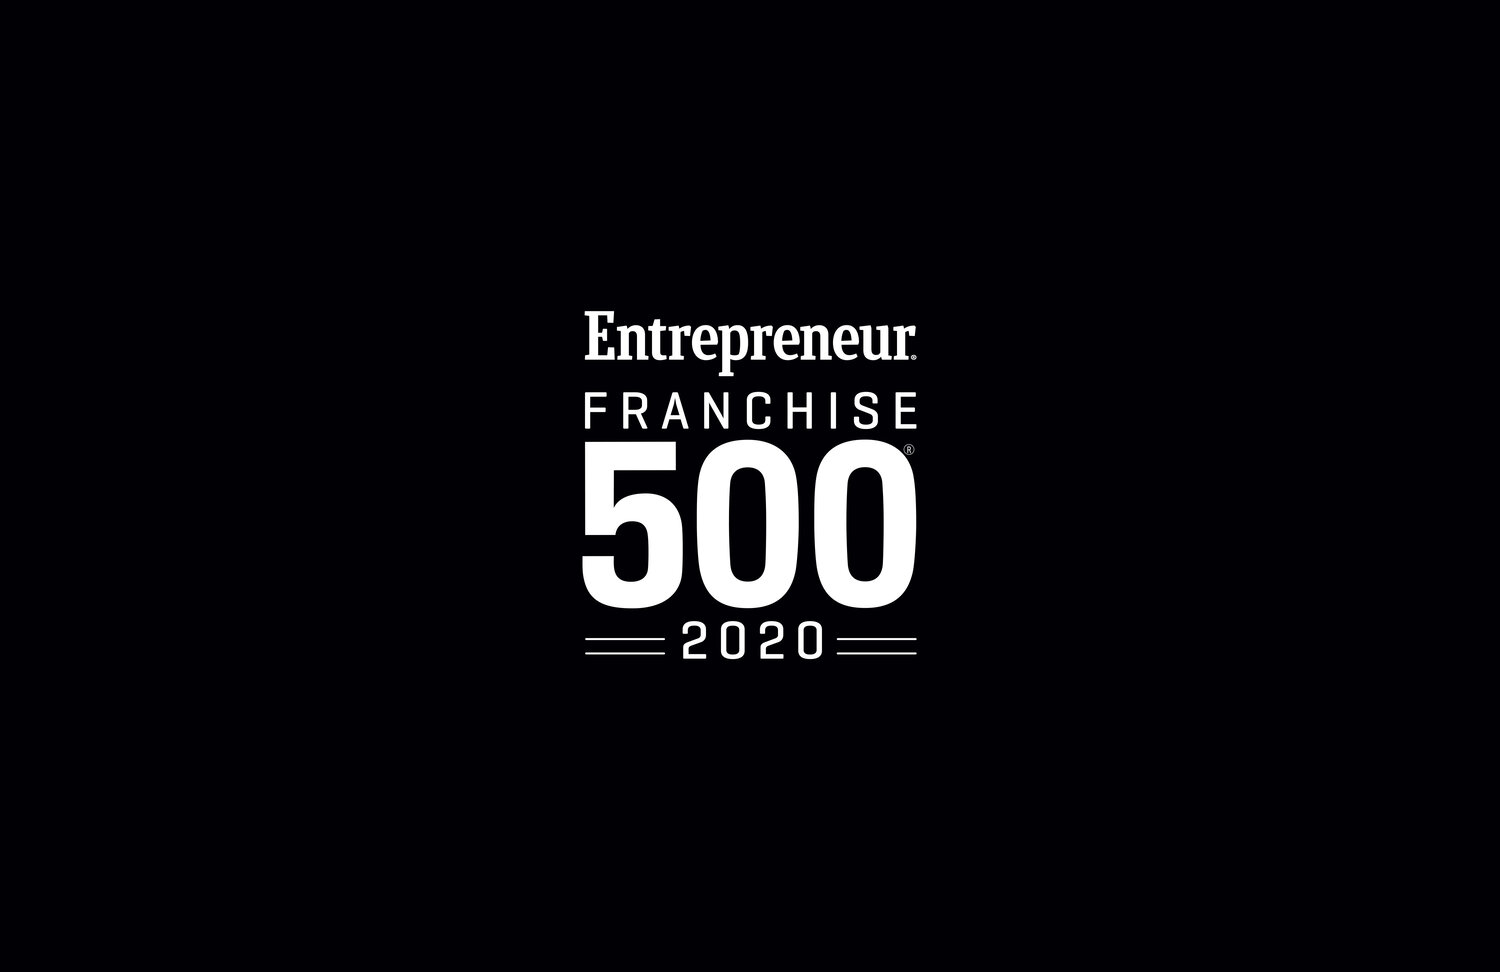 Entrepreneur Media<span> has released its 2020 Franchise 500 Ranking list and CycleBar is up 20 places from last year</span>